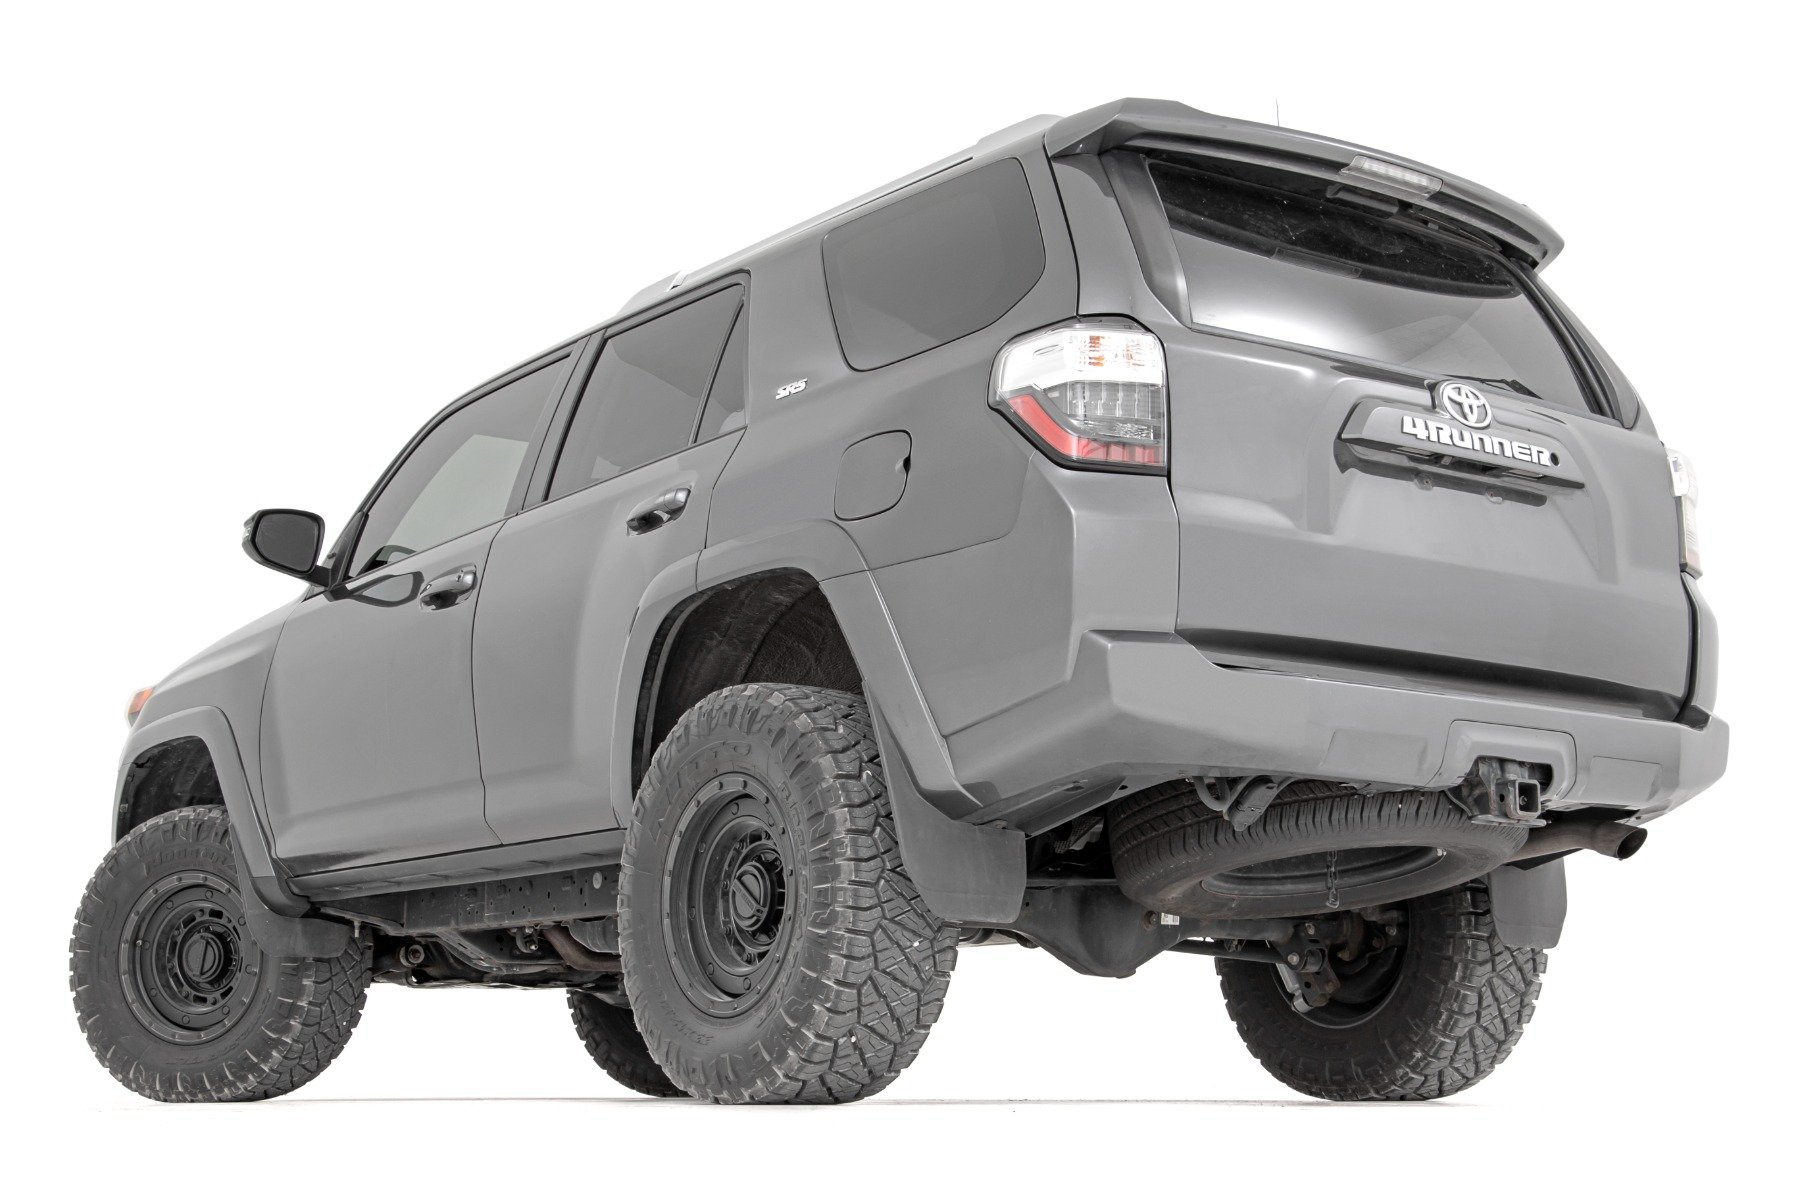 3 Inch Lift Kit | Upper Control Arms | RR Coils | N3 Struts | Toyota 4Runner (10-23)